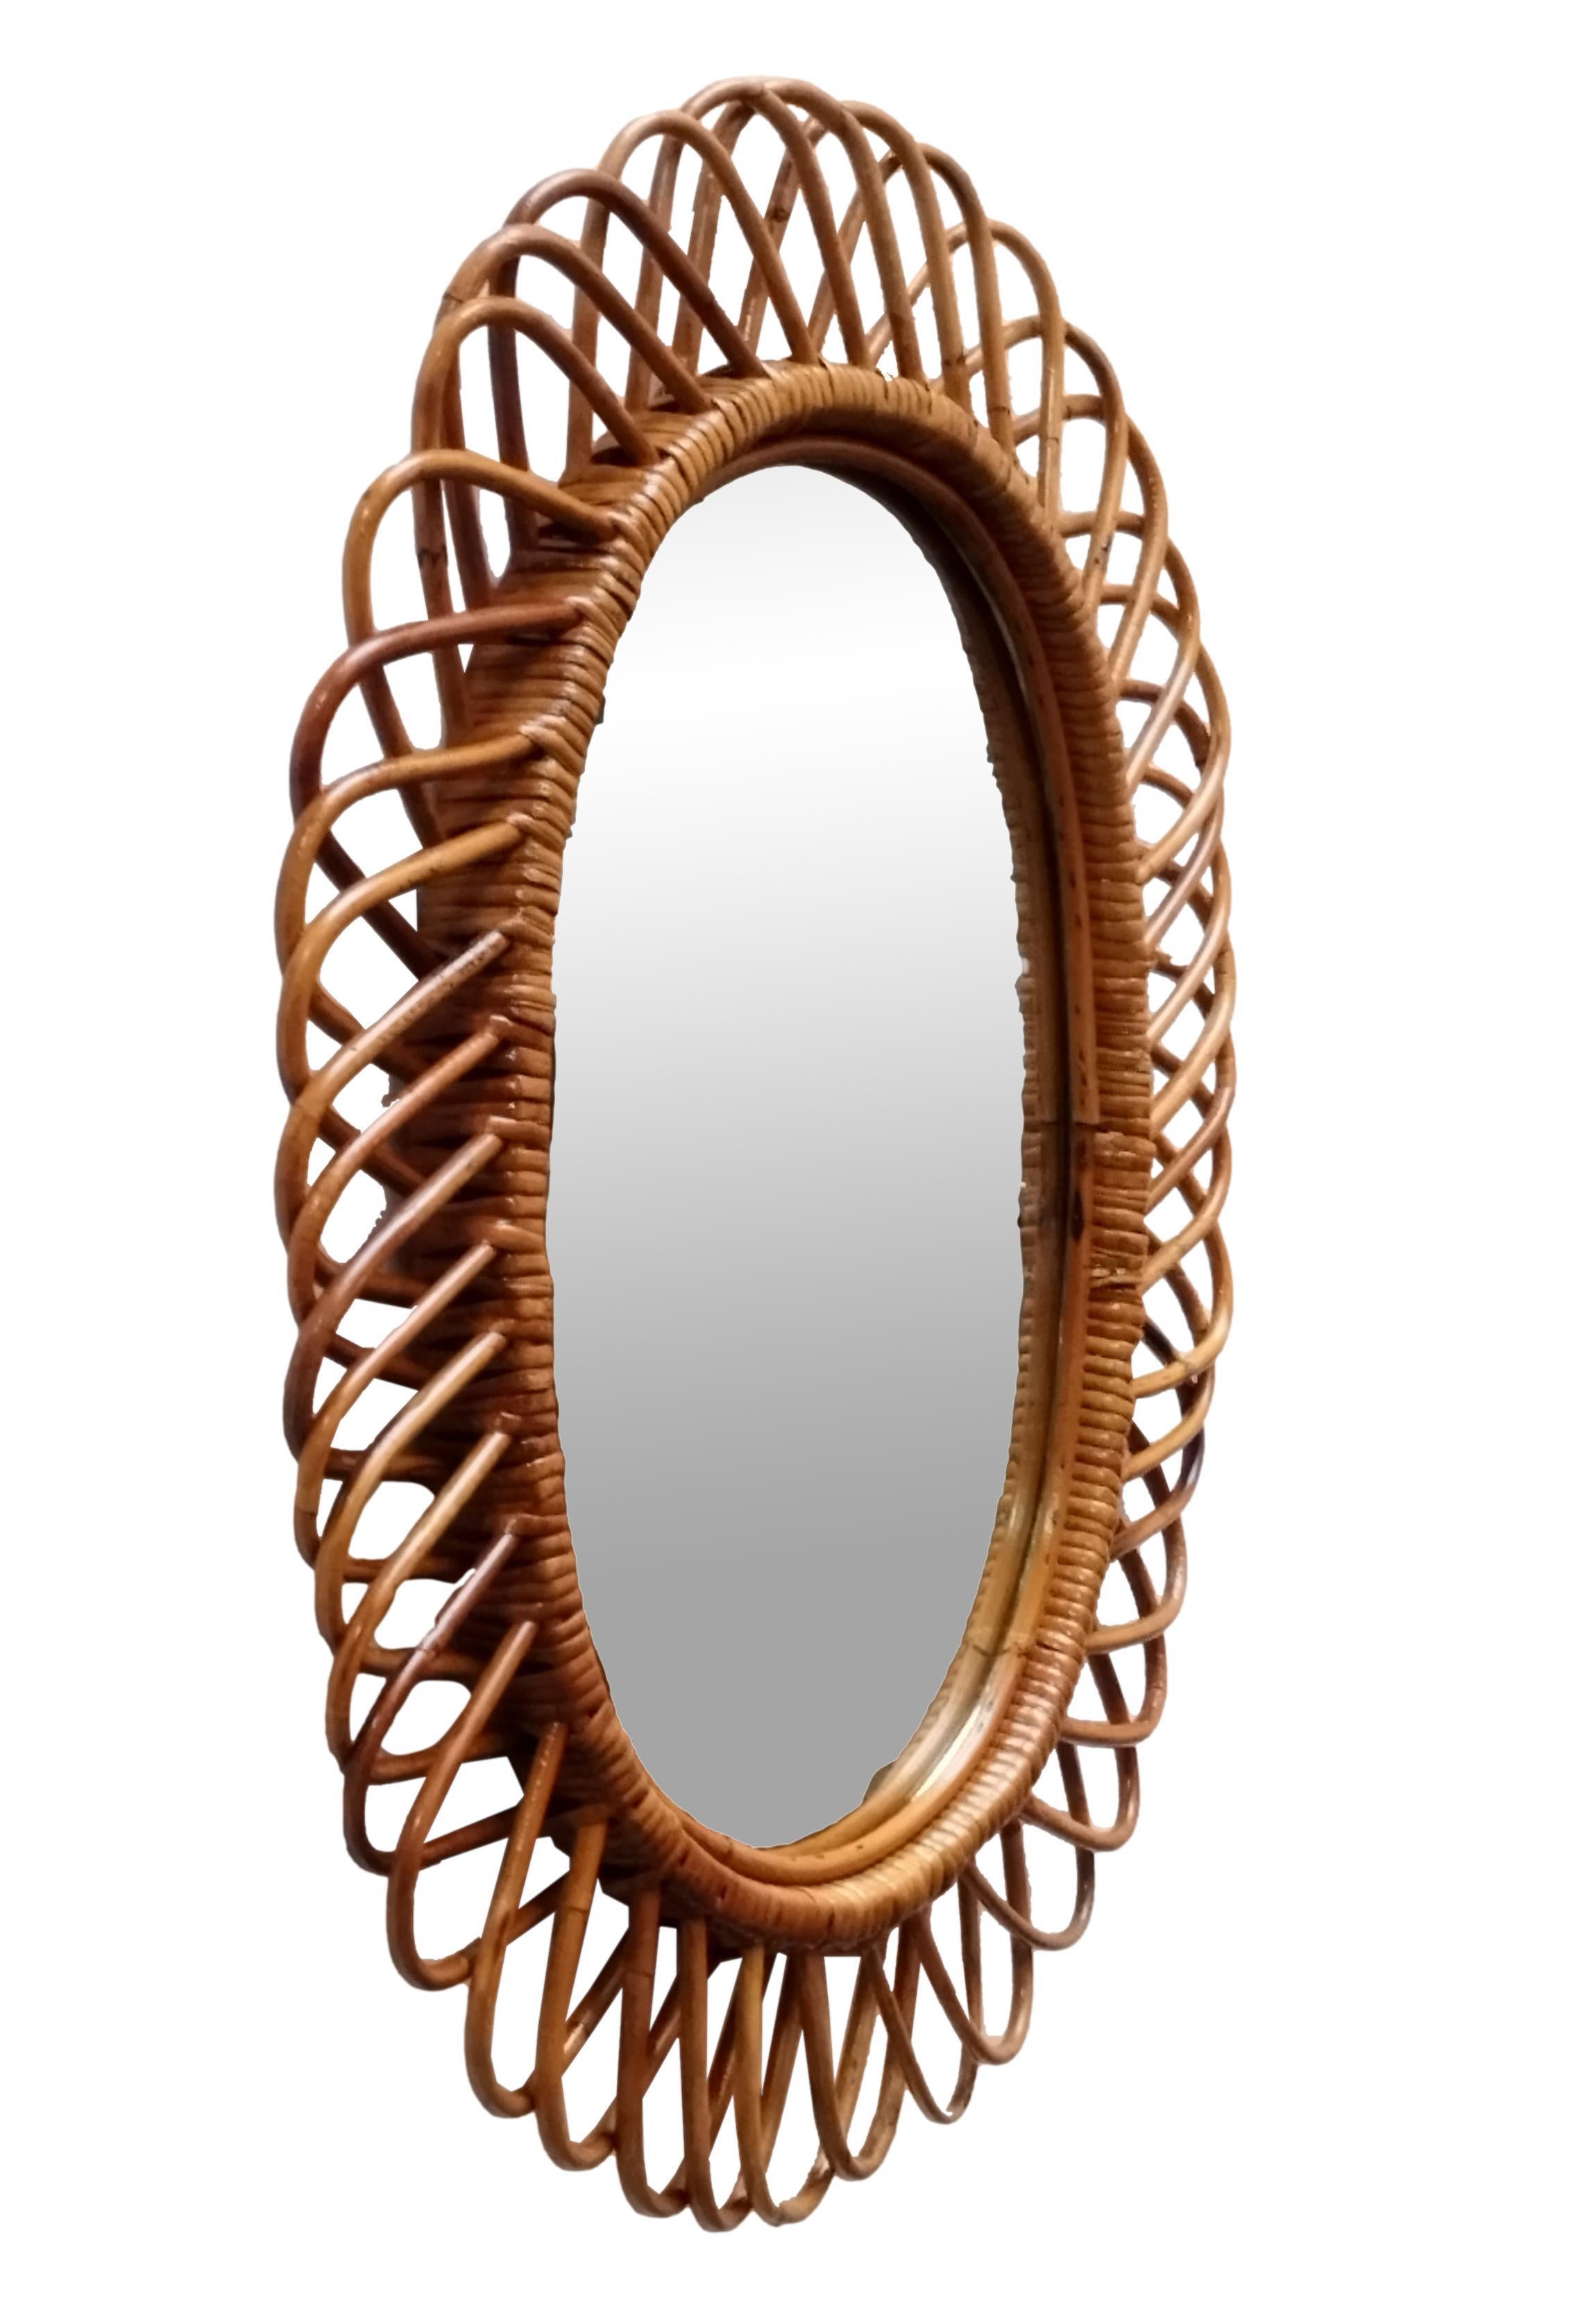 Italian rattan wall mirror (circa 1960s) by Franco Albini. The mirror has a complex weave of rattan in a series of horseshoe projections on the edge of the frame. There is a lovely aged patina on the rattan; the glass is intact.